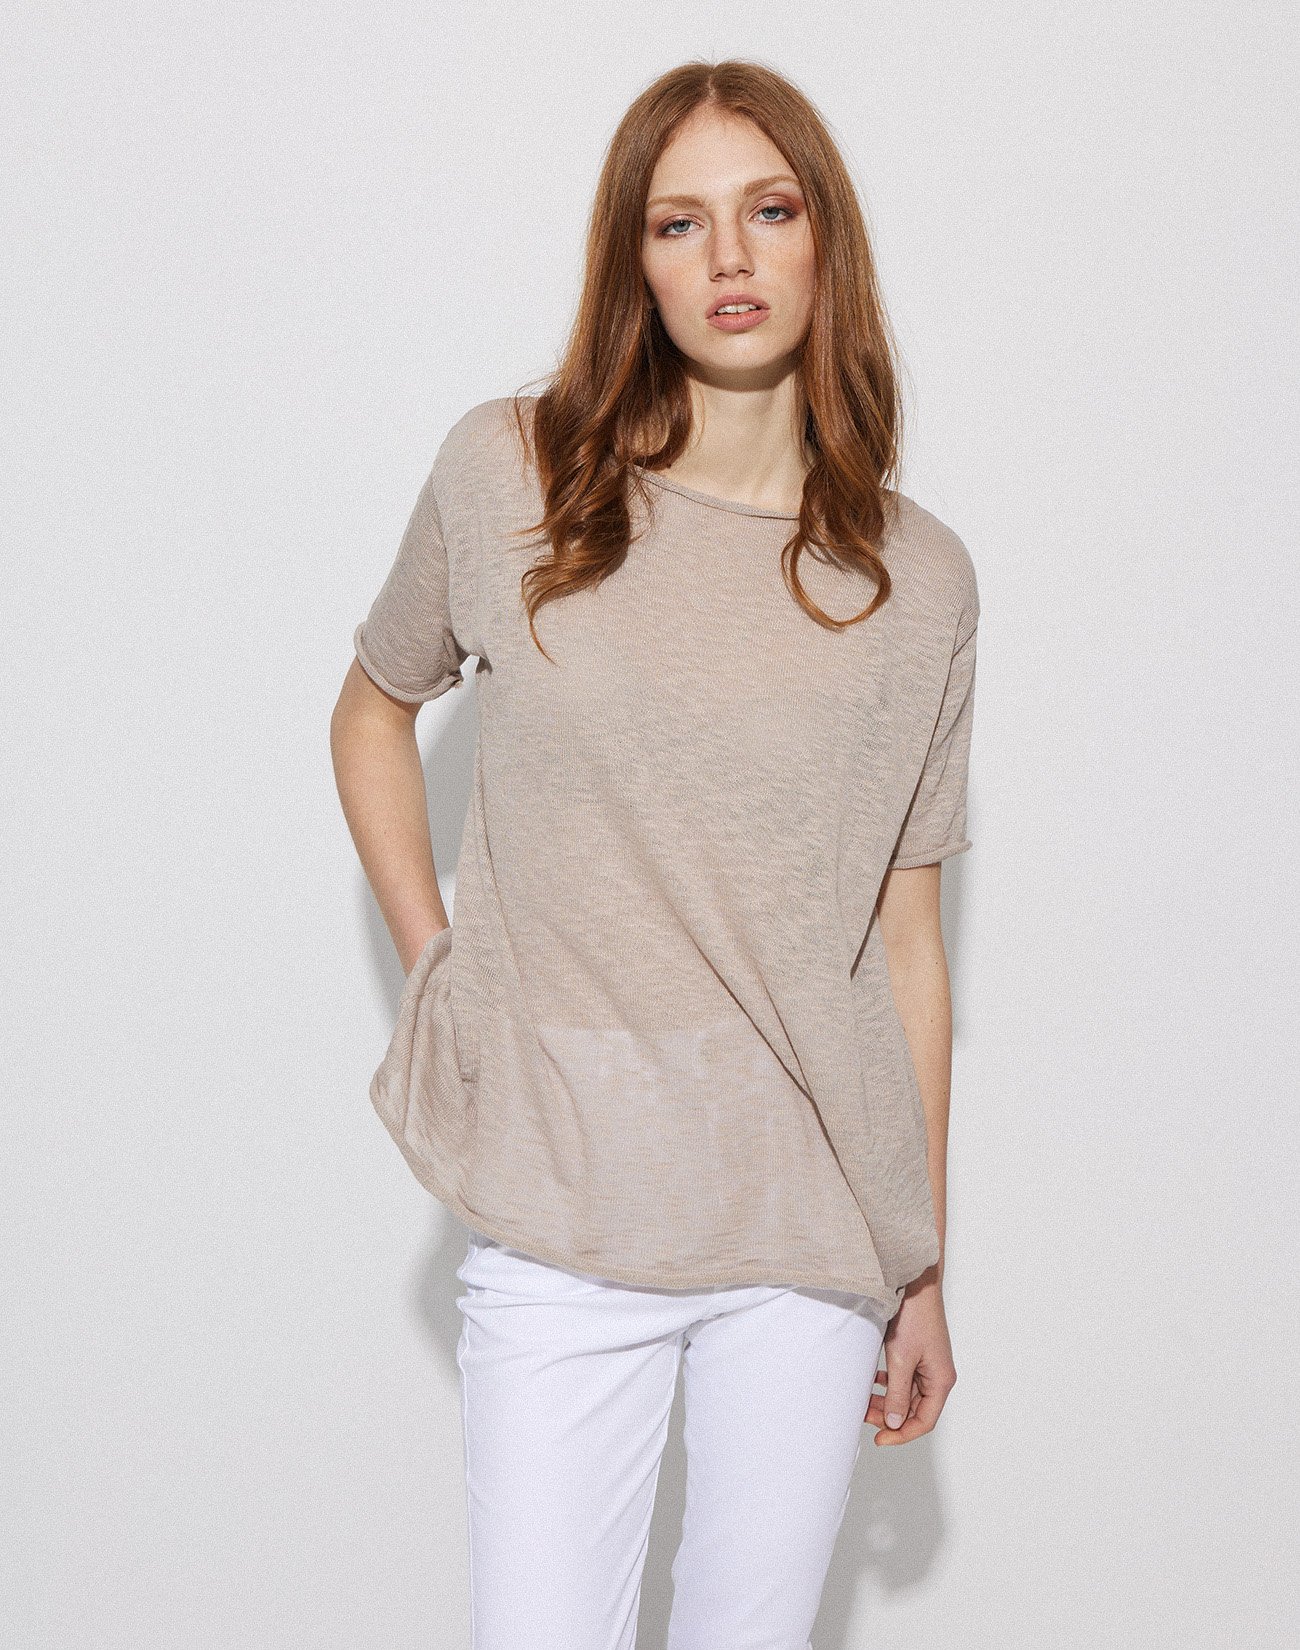 Overised knit top